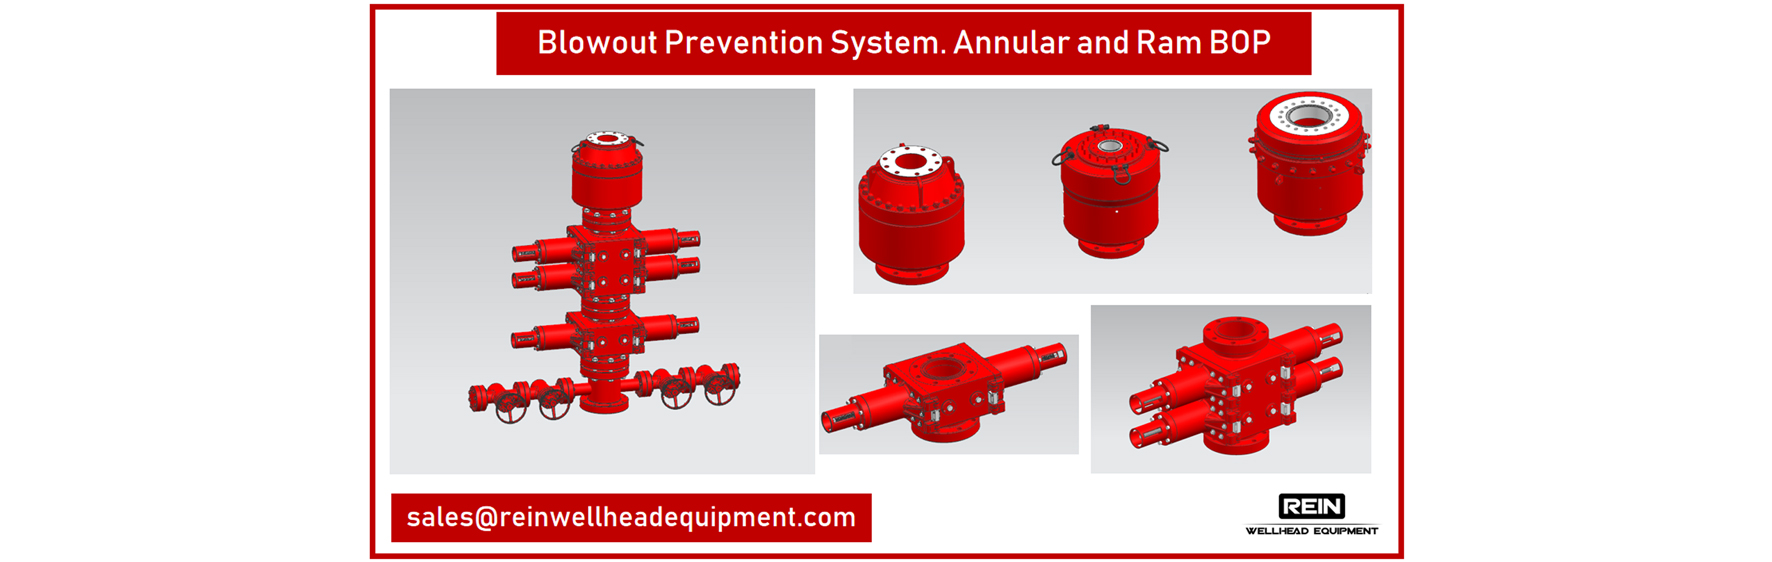 /imgs/news/Rein Wellhead Equipment is discussing with a partner from Kazakhstan concerning supply of Blowout Prevention System, consisting of BOP stack, annular BOP, ram BOP, BOP Accumulator Unit.jpg